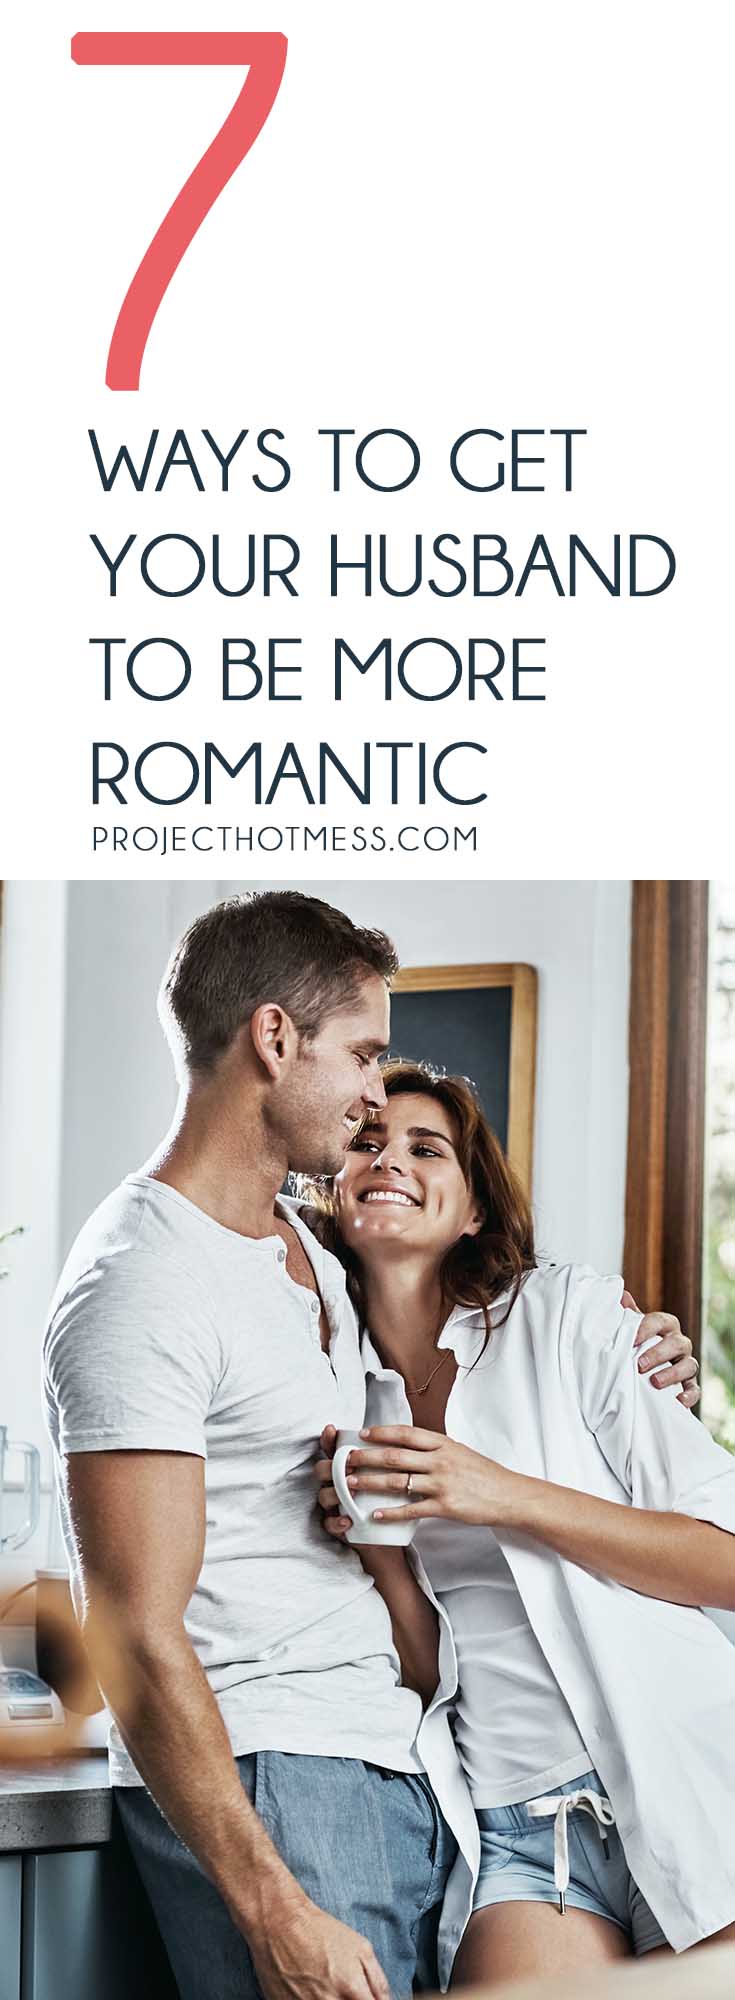 How To Get Your Husband To Be More Romantic - Project Hot Mess